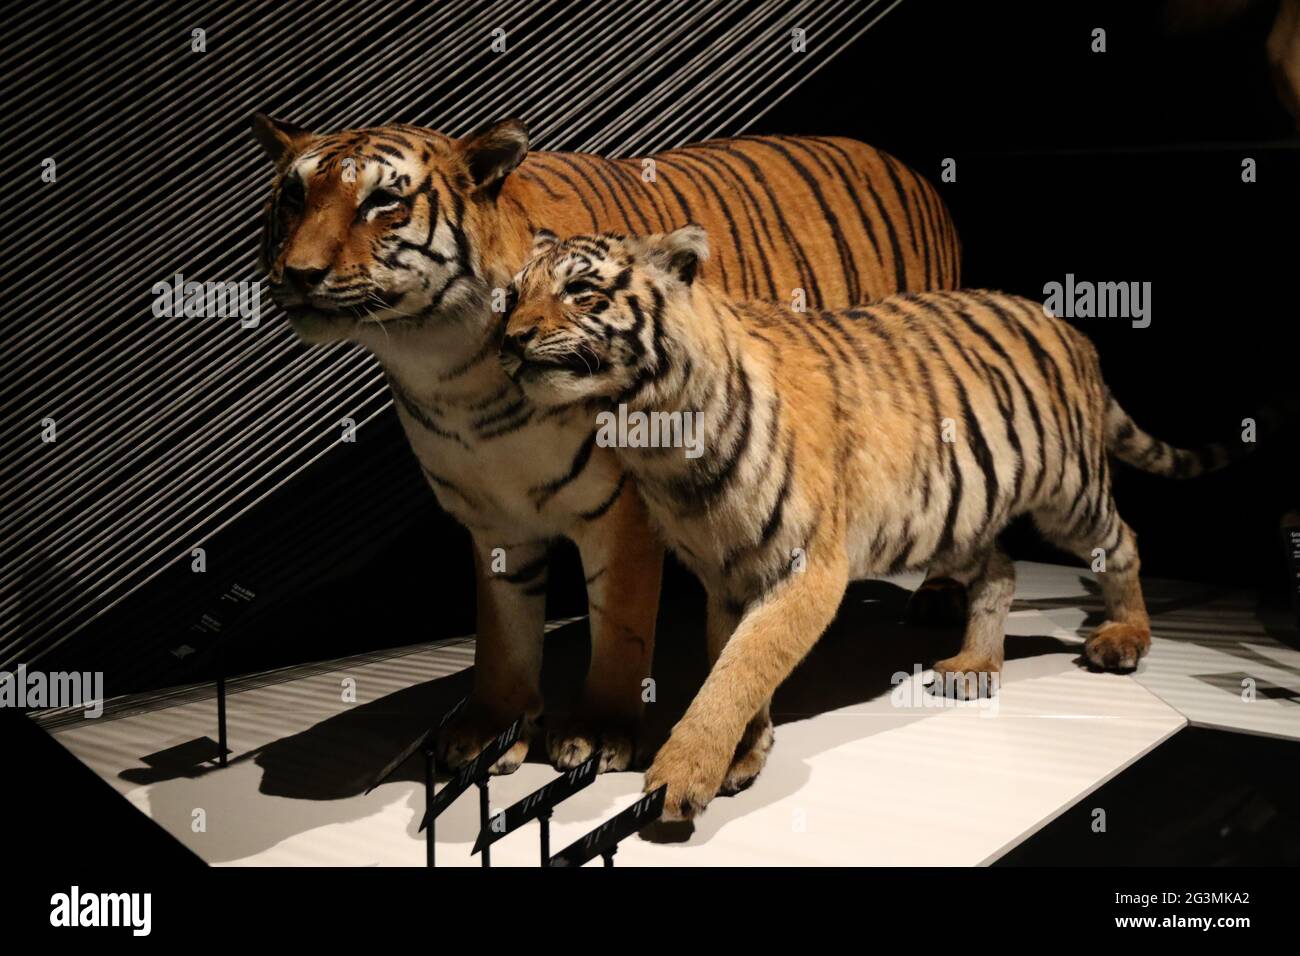 FRANCE RHONE (69)  OF CONFLUENCES, NATURAL HISTORY AND COMPANY,  LOCATED AT THE CONFLUENCE OF THE RHONE AND SAONE, MOUNTED ANIMALS, TIGER  Stock Photo - Alamy